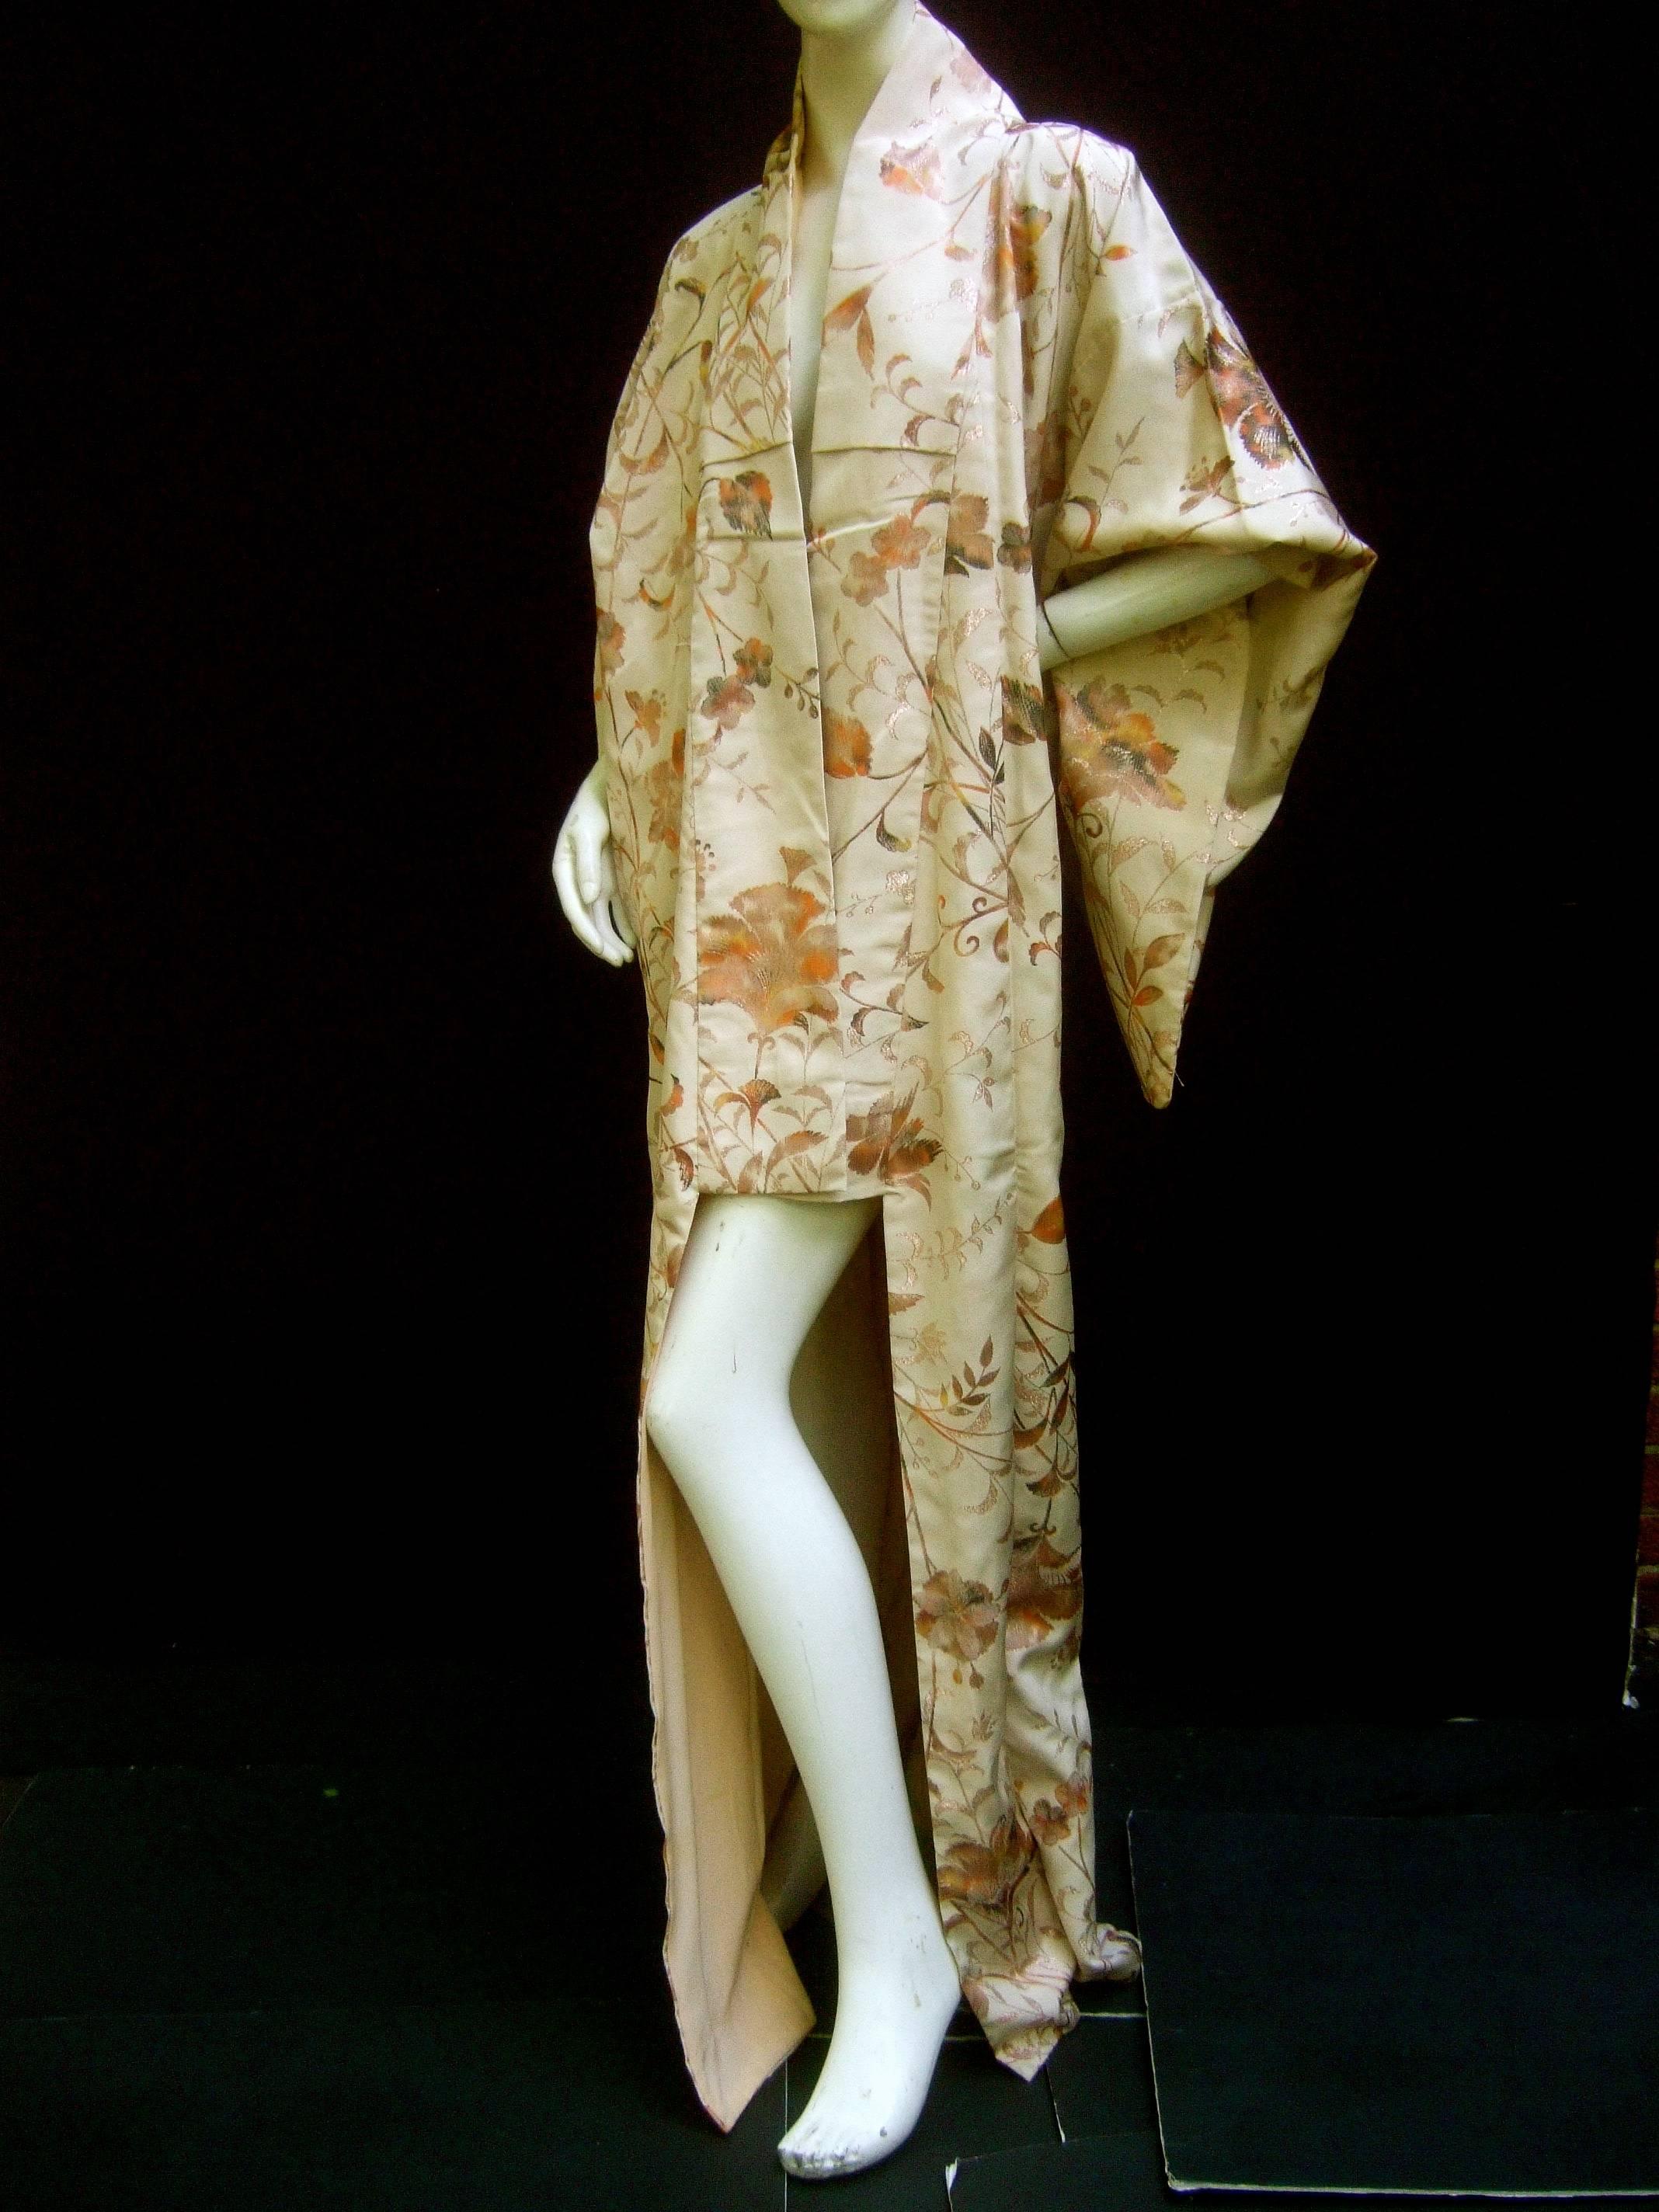 Exotic Japanese floral brocade kimono c 1970s
The elegant kimono is designed with a garden 
of lush flower blooms in autumn hues 

The background is beige sand color that illuminates
the brown and burnt orange blooms. The sinuous leaves
are accented